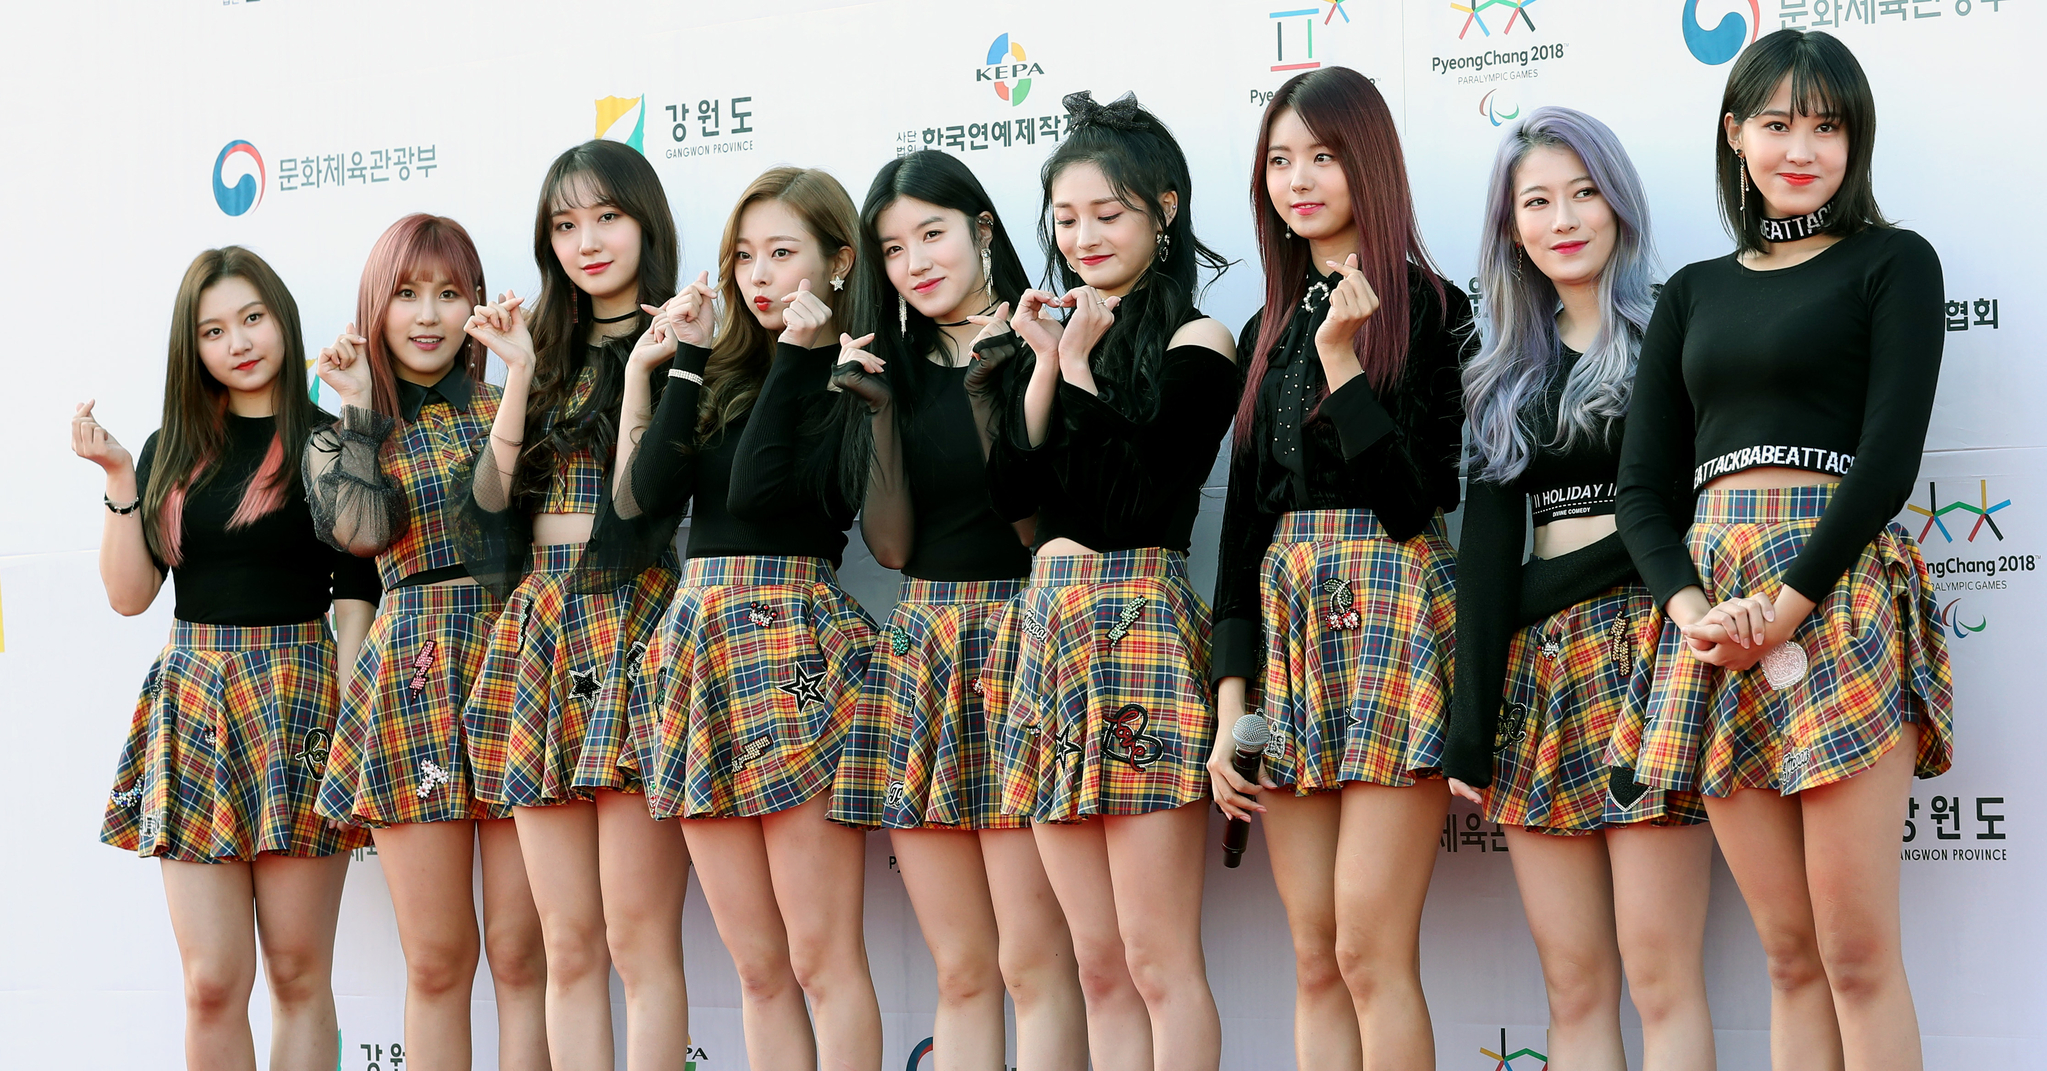 PRISTIN Is Disbanding 2 Years After Their Debut